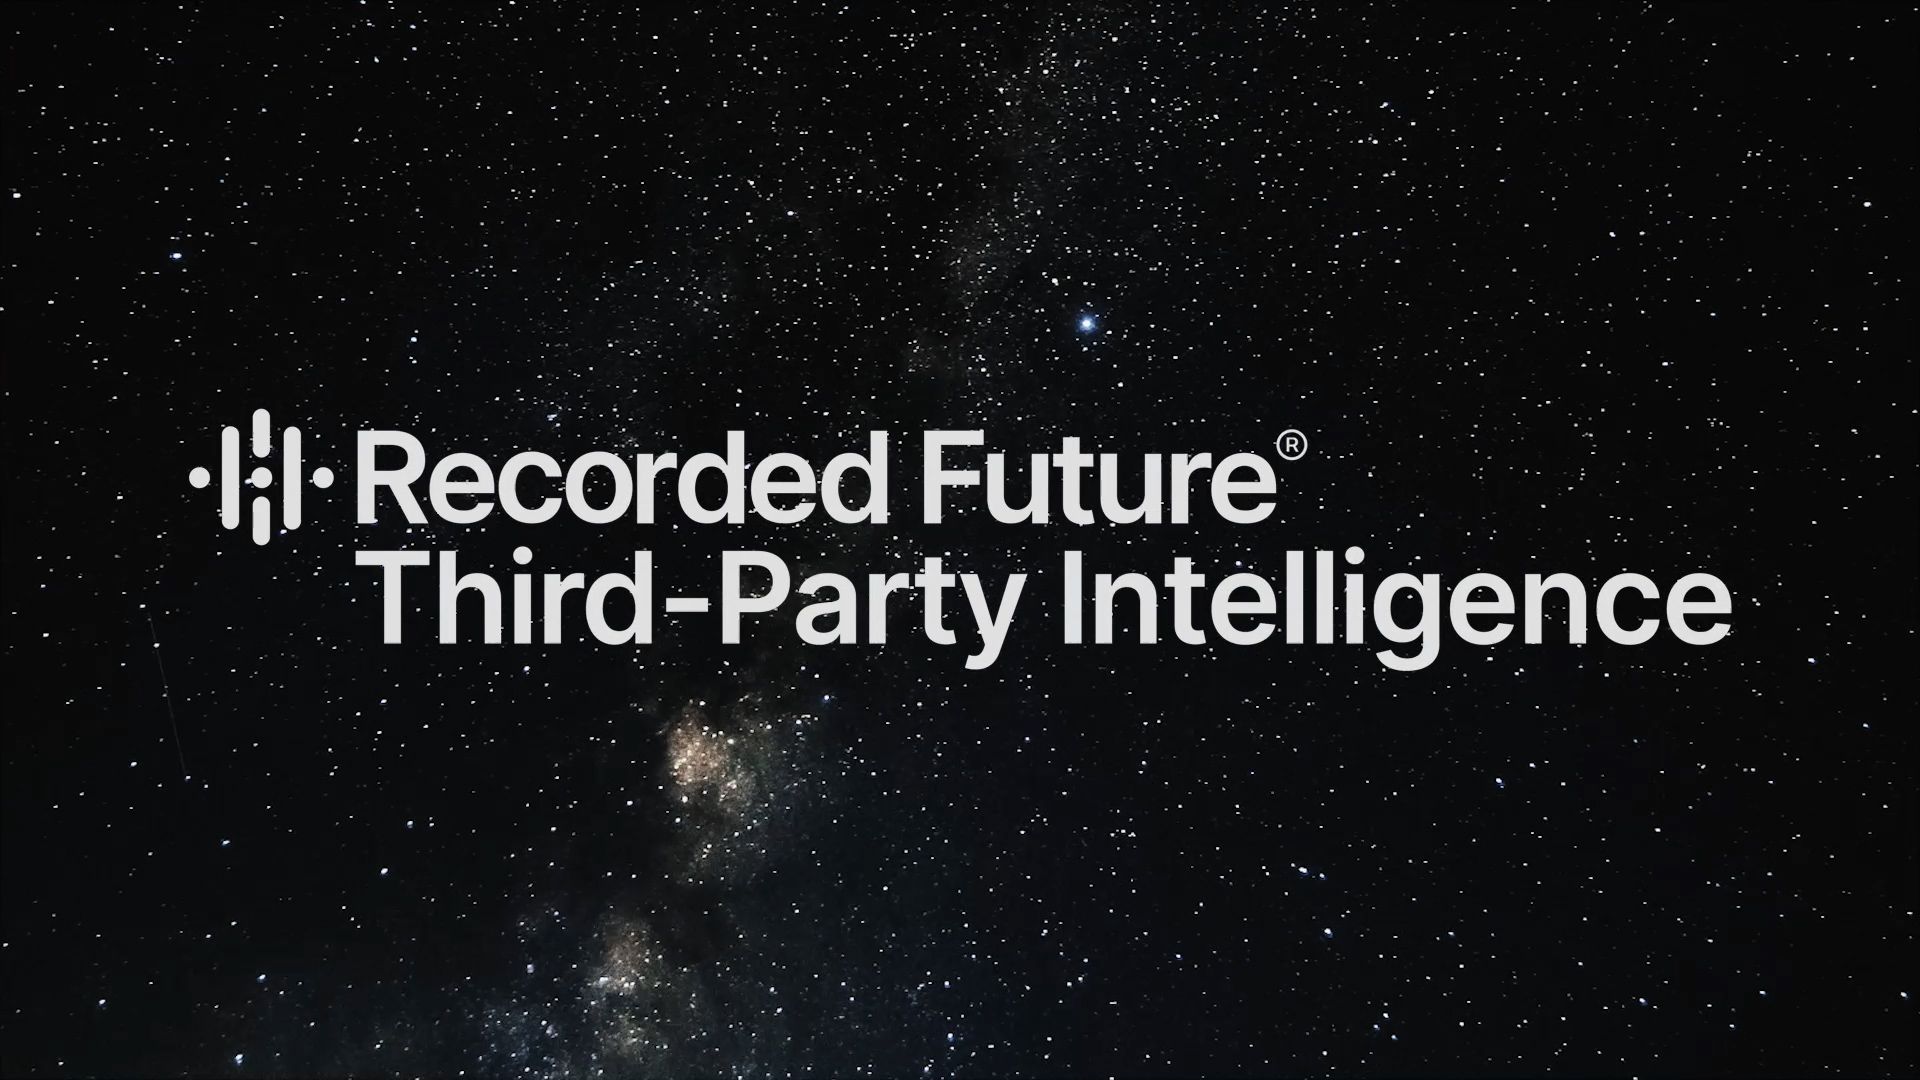 Third-Party Intelligence Video